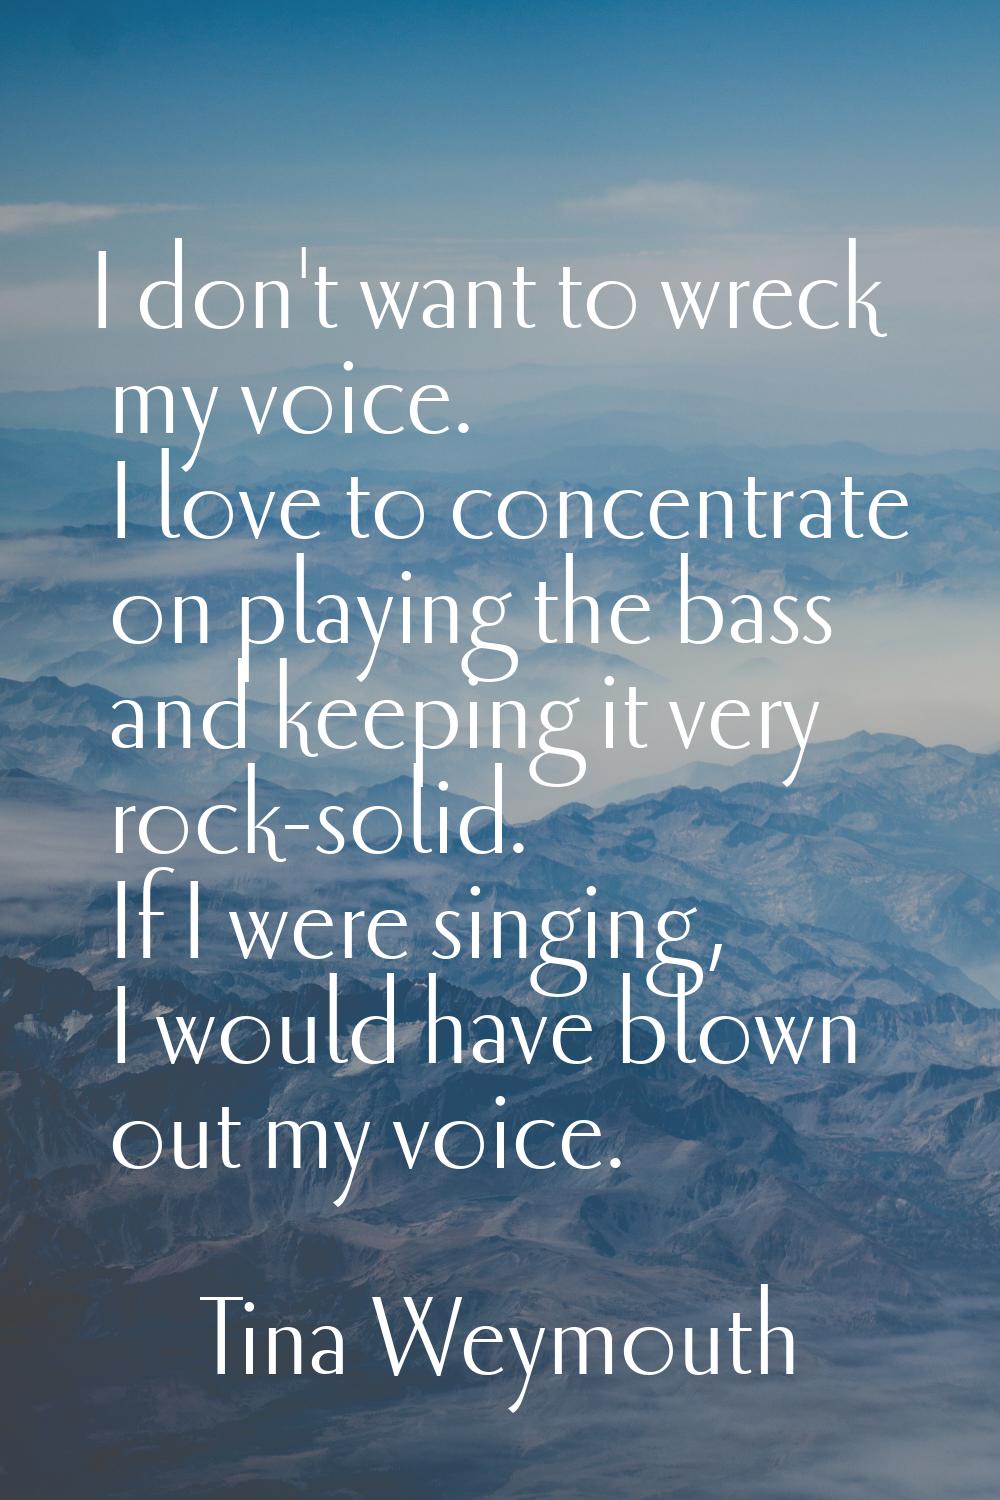 I don't want to wreck my voice. I love to concentrate on playing the bass and keeping it very rock-